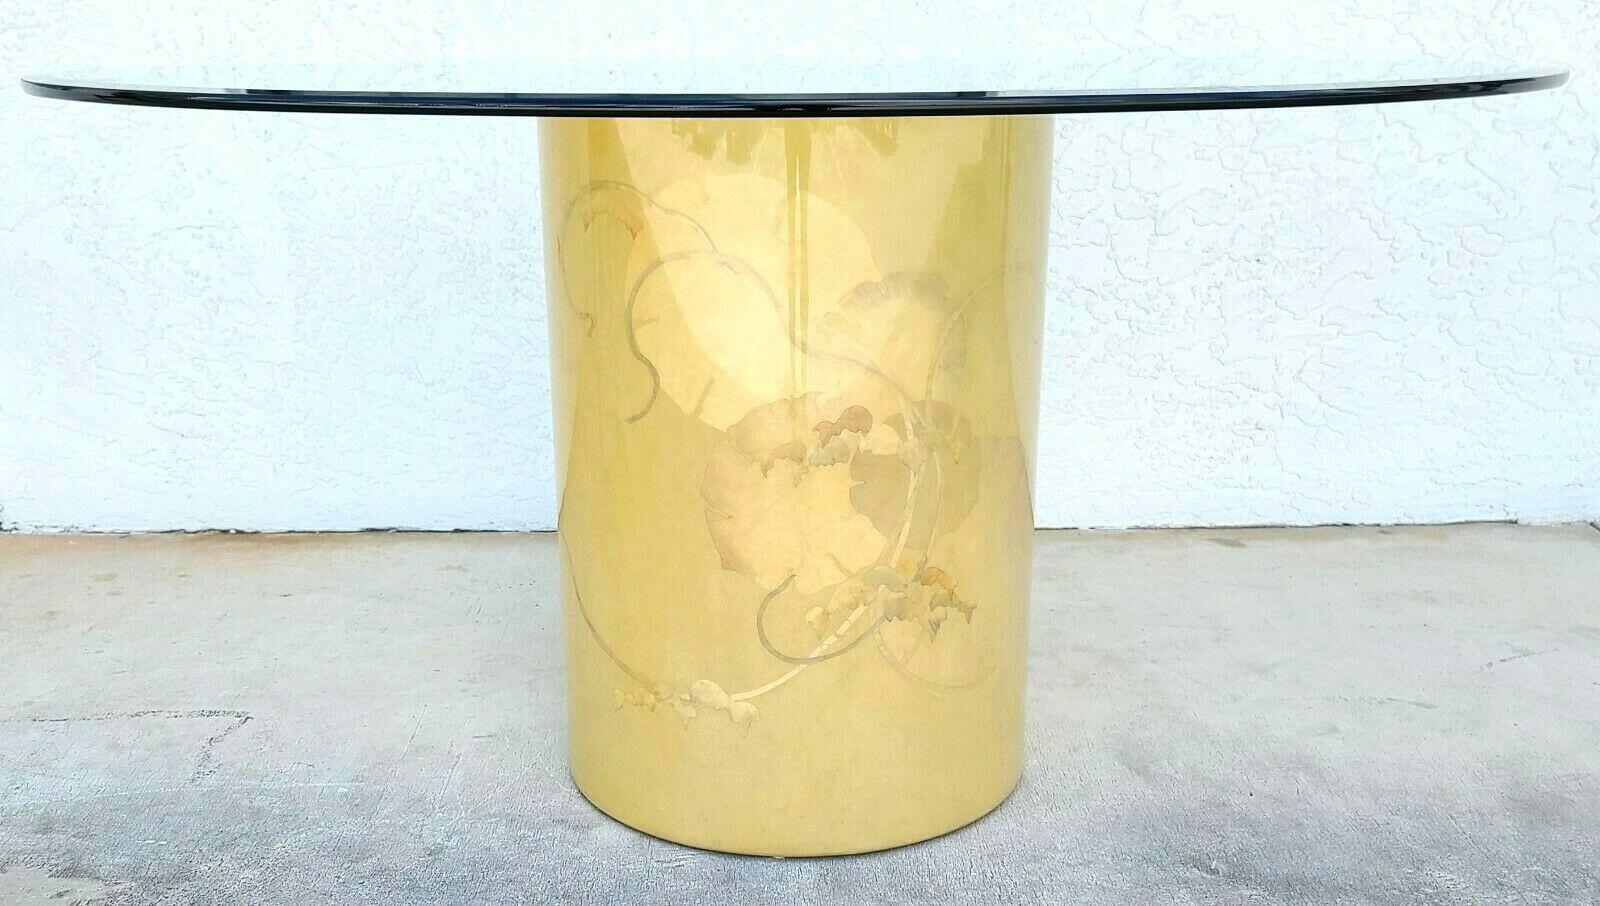 Offering One Of Our Recent Palm Beach Estate Fine Furniture Acquisitions Of A 
1970s Lacquered Fish Pond Design dining table by Laque Martin
The lacquered base gives you the feeling you are looking down into a fish pond with Water Lilies and